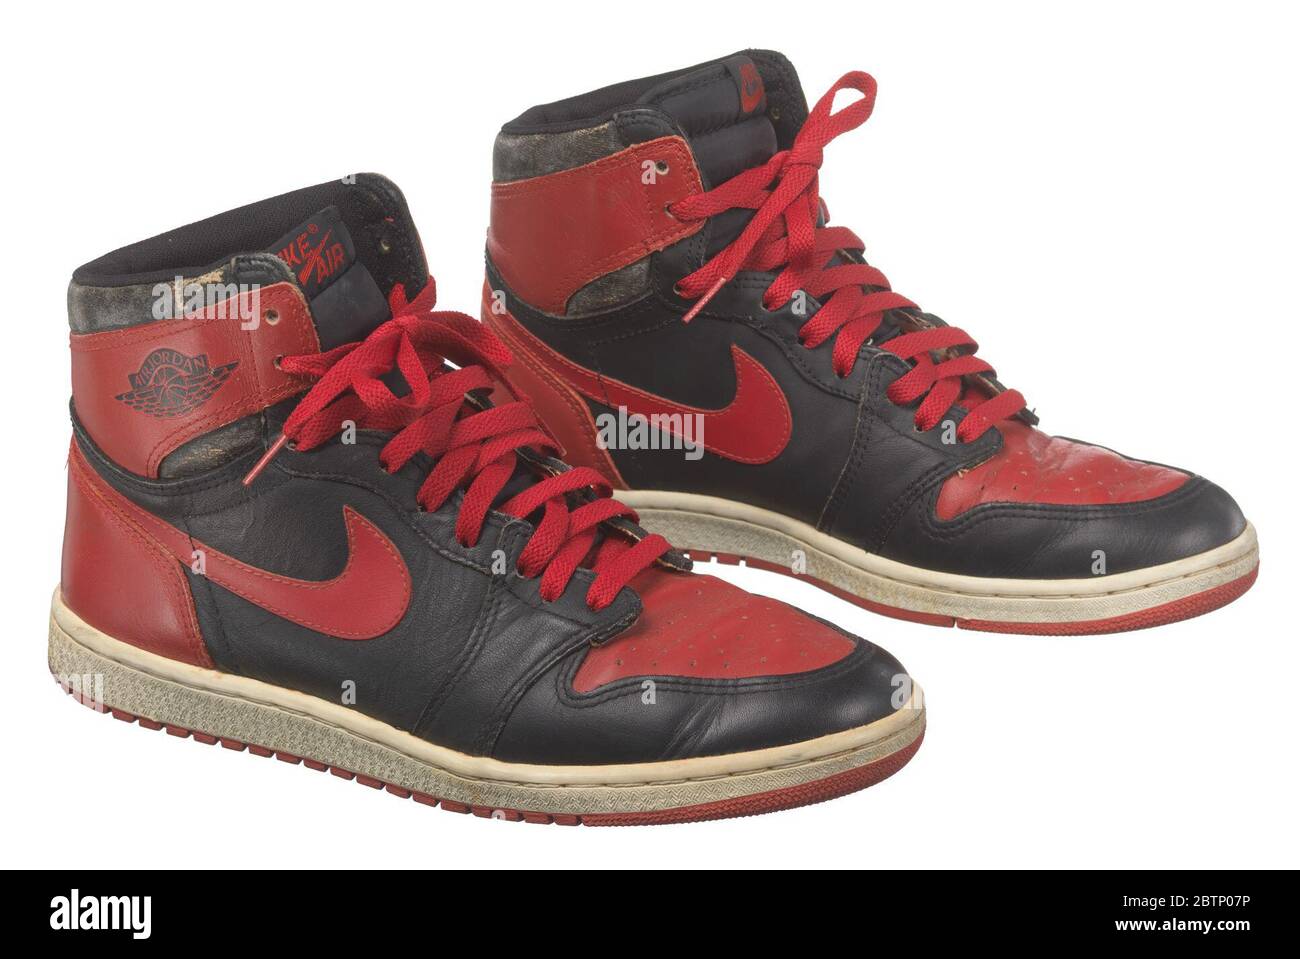 Pair of red and black Air Jordan I high top sneakers made by Nike. A pair  of Nike brand red and black Air Jordan I high top sneakers, also known as  the "